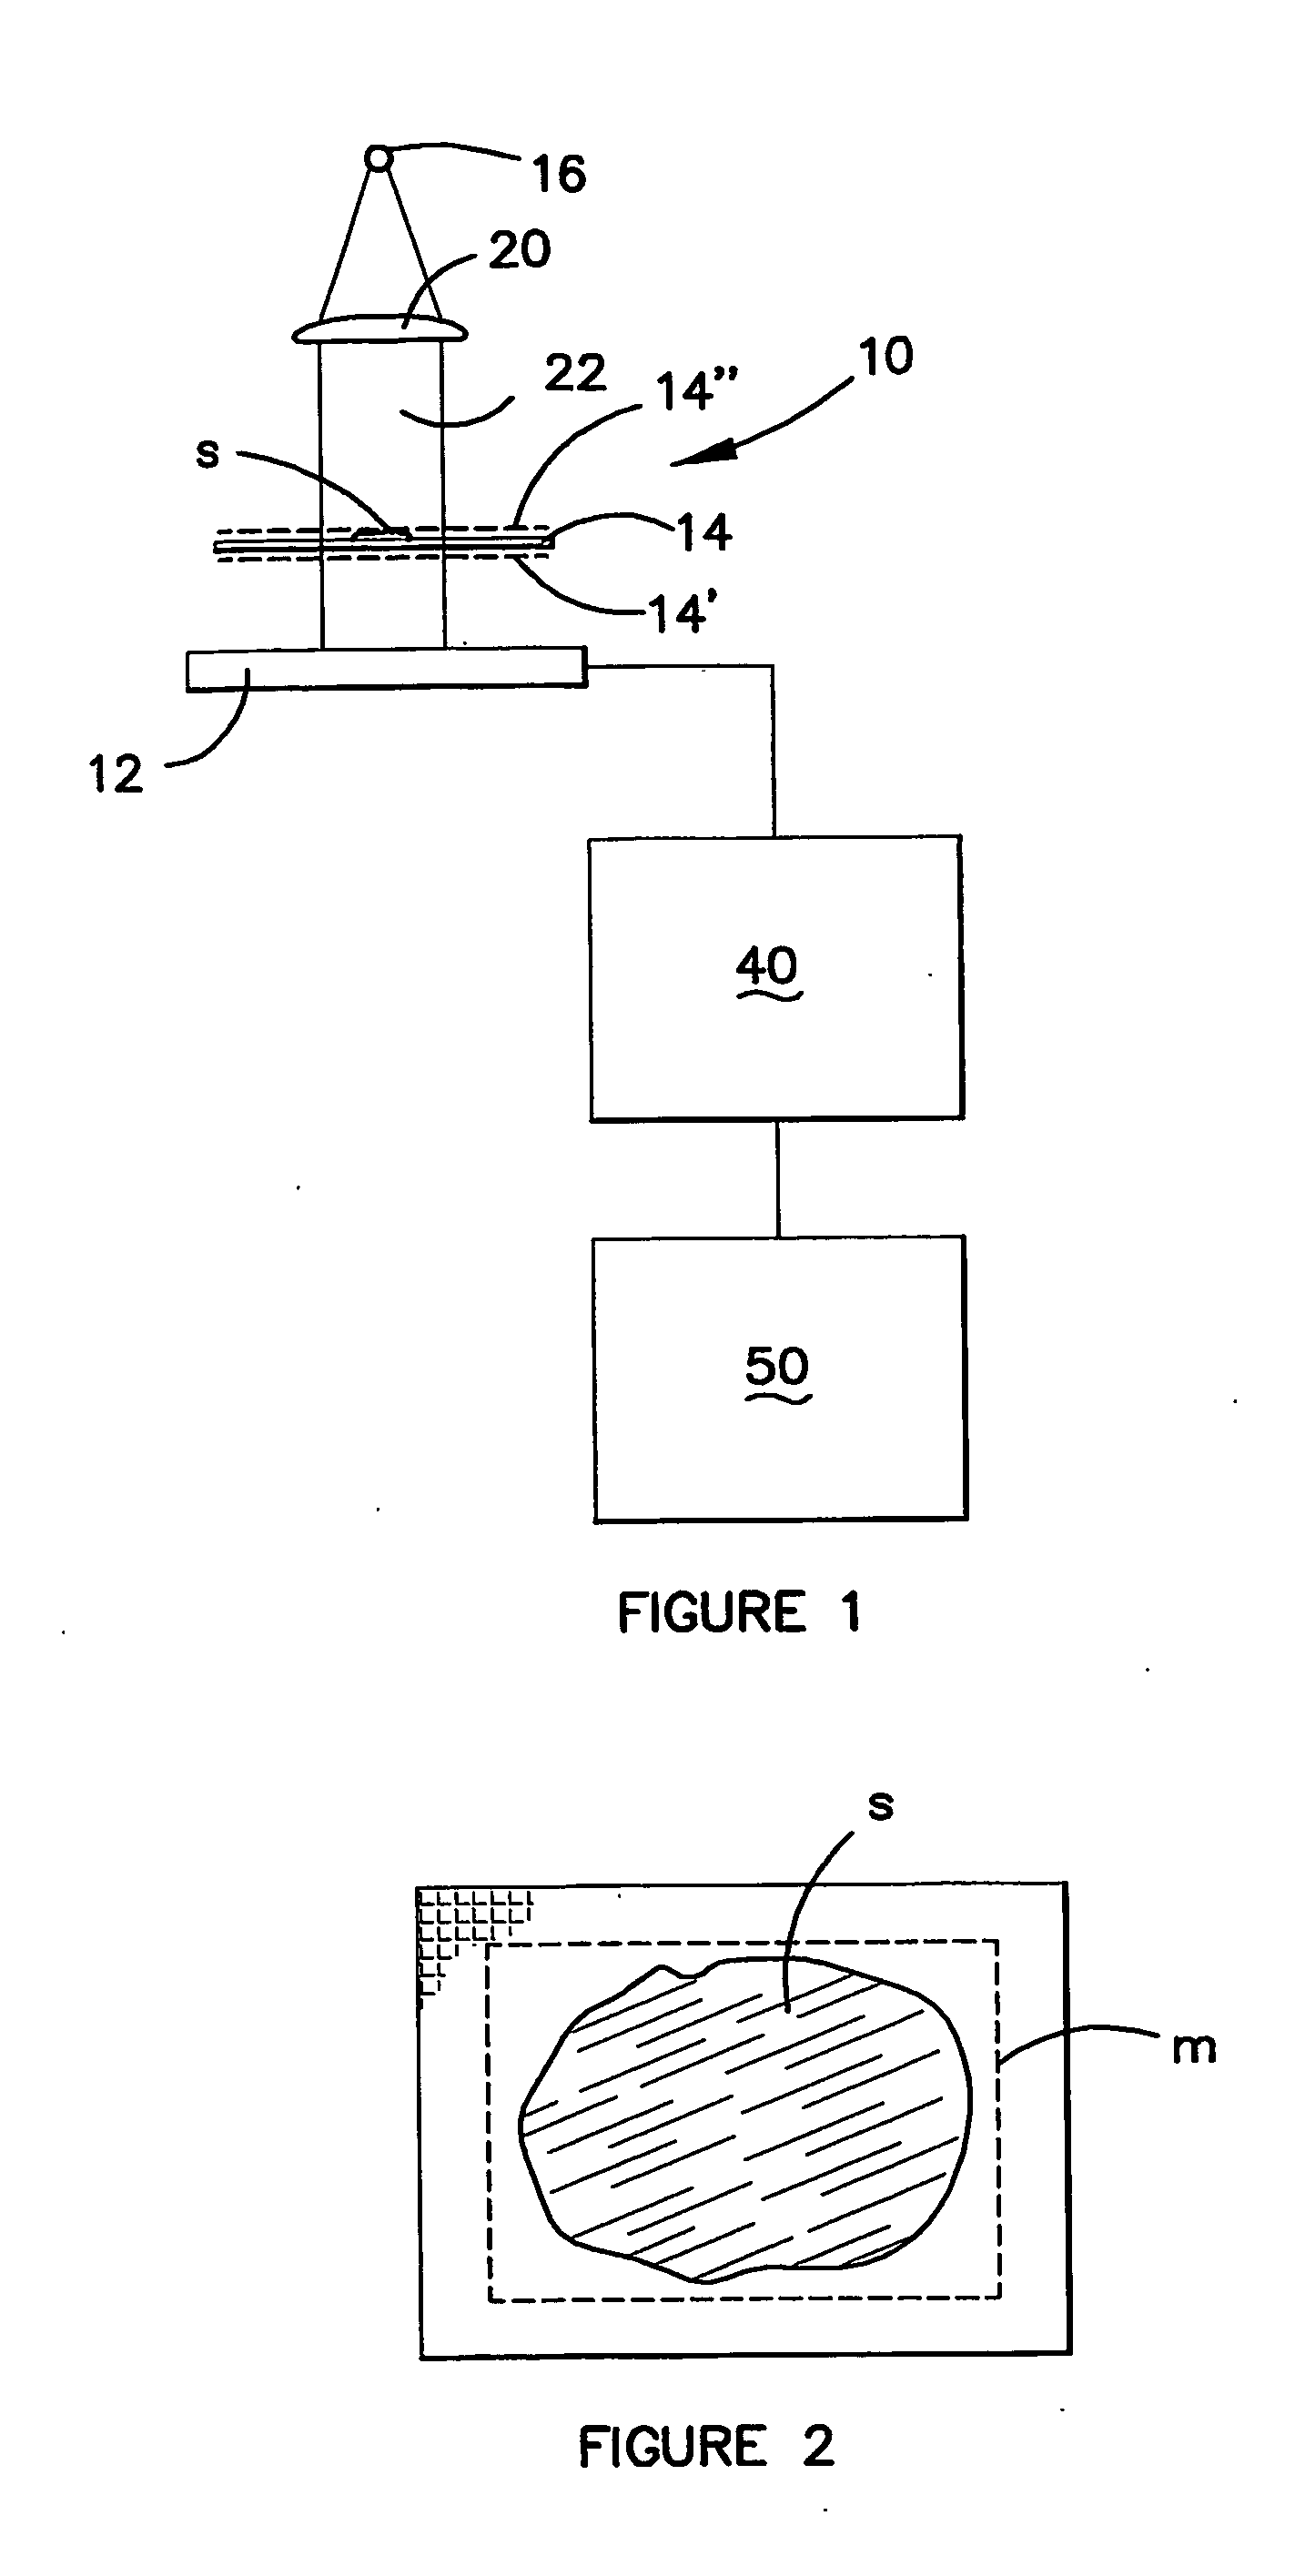 Method and apparatus for determining the area or confluency of a sample